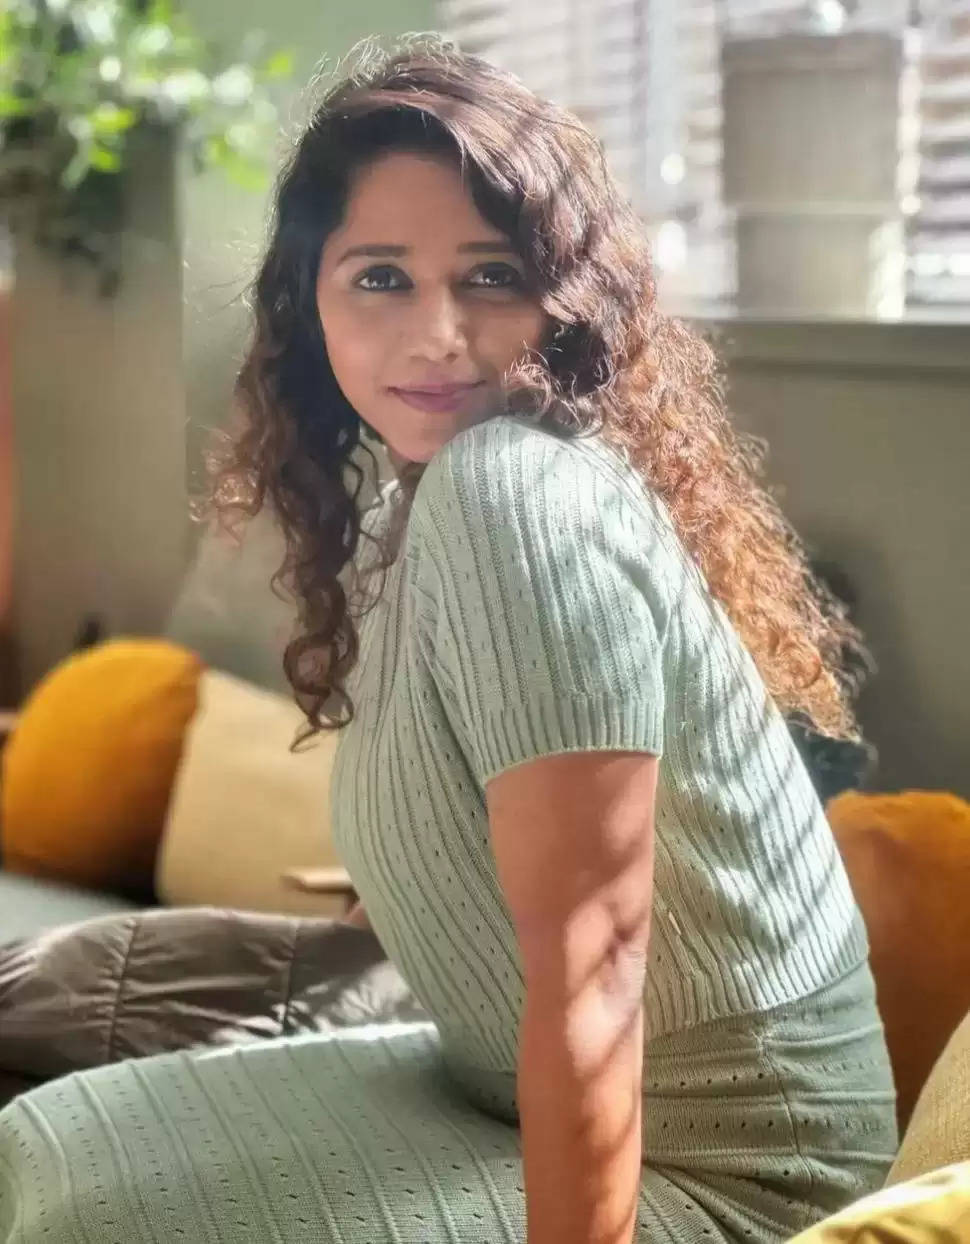 For actress Yashashri Masurkar, happiness is all about the small things in life.